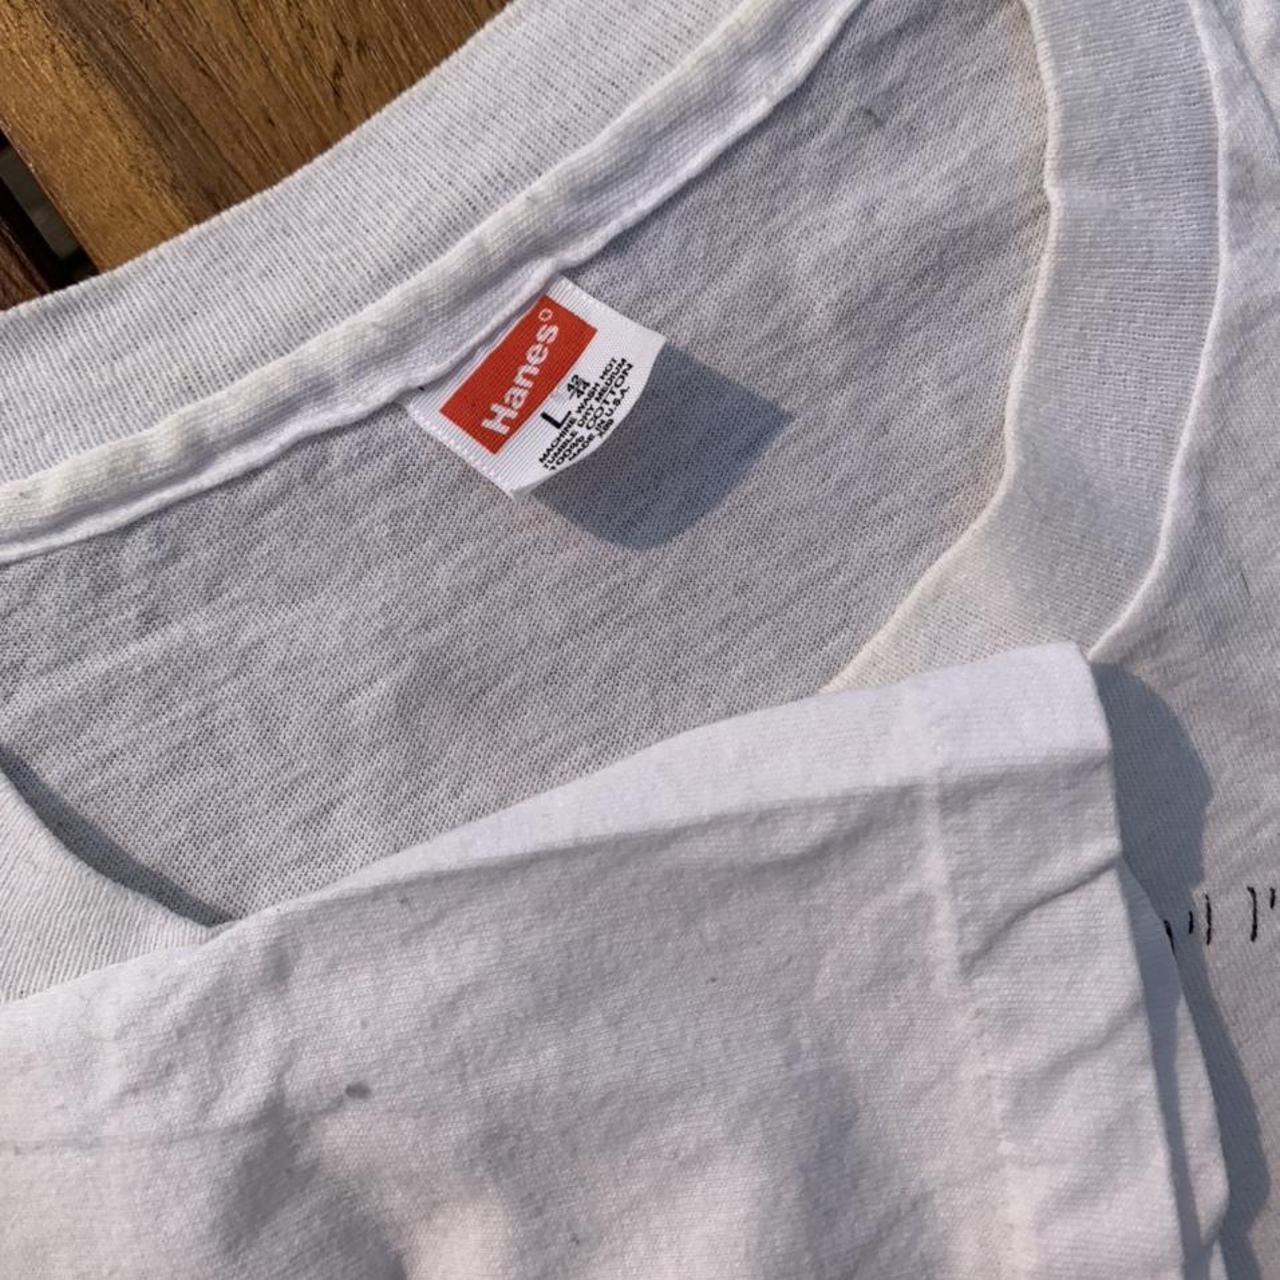 Hanes Men's White and Red T-shirt | Depop